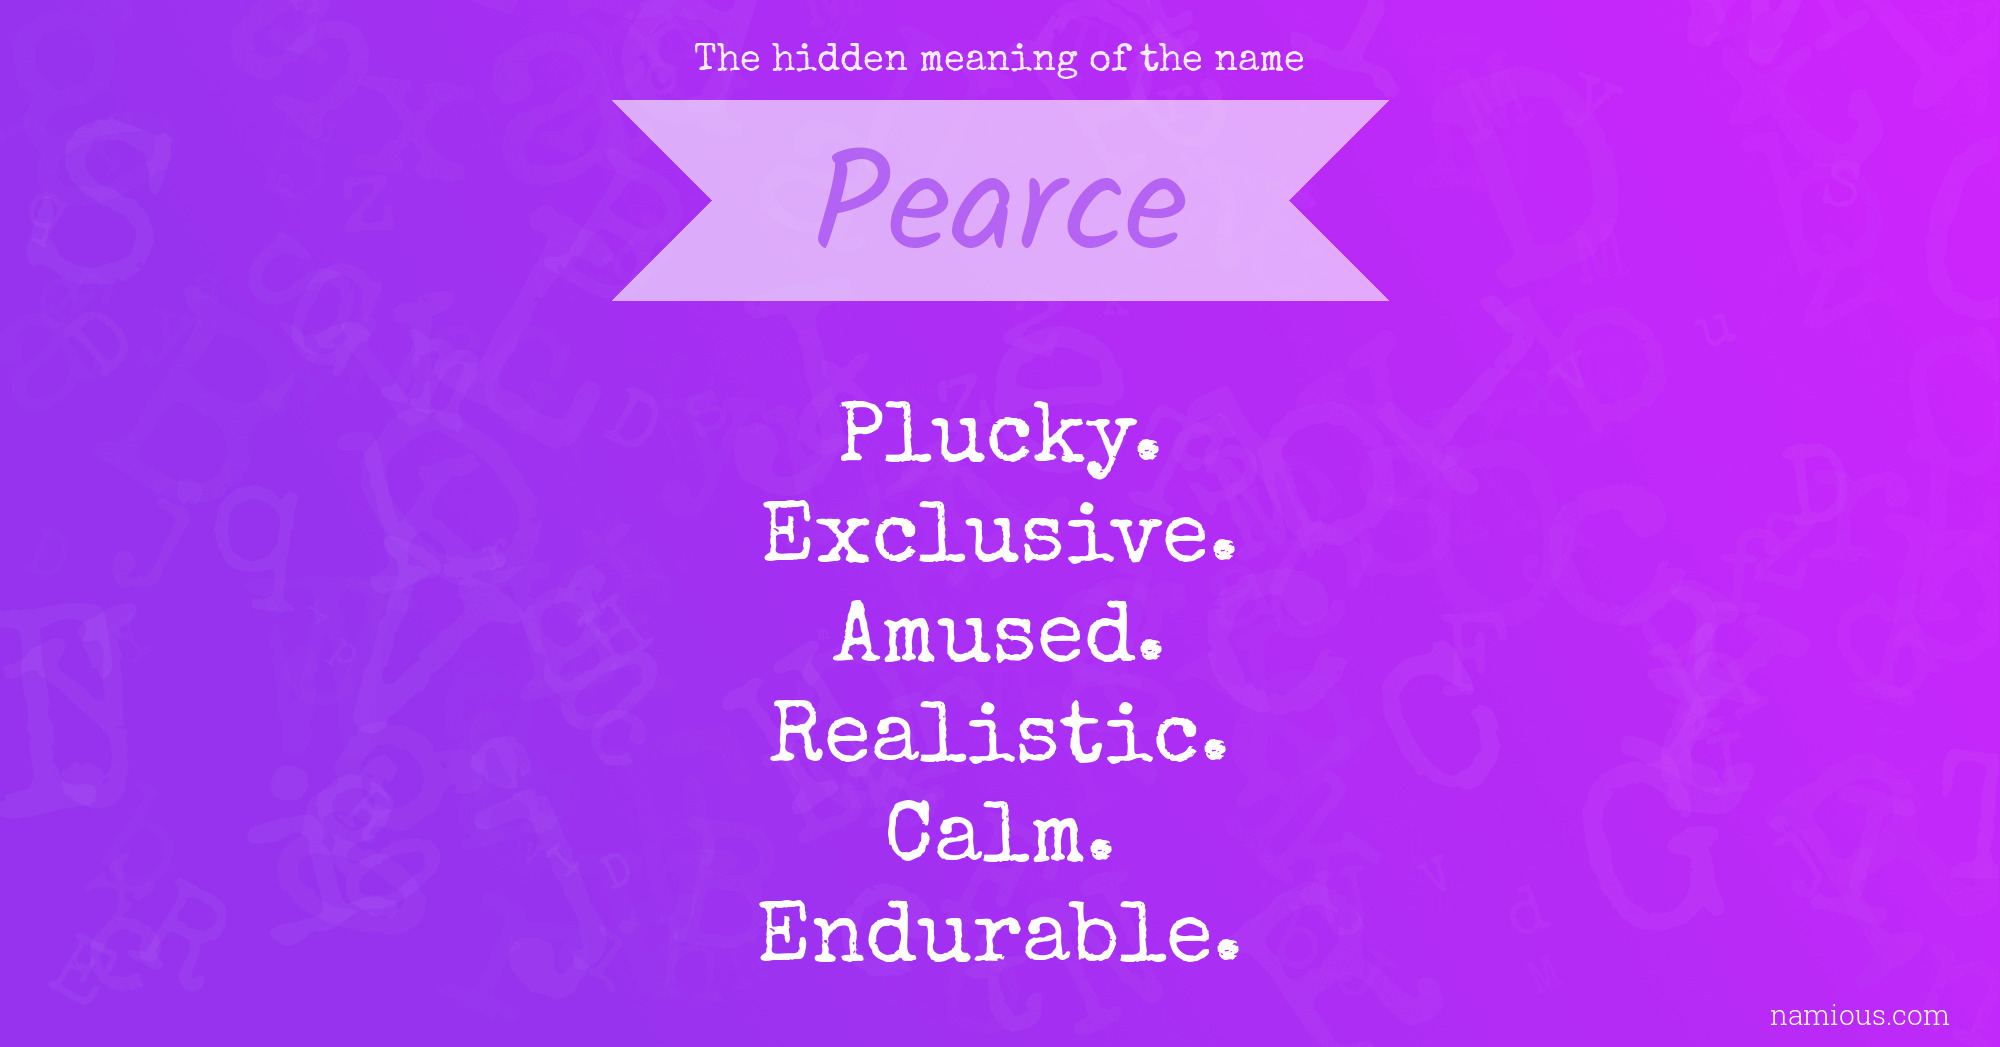 The hidden meaning of the name Pearce